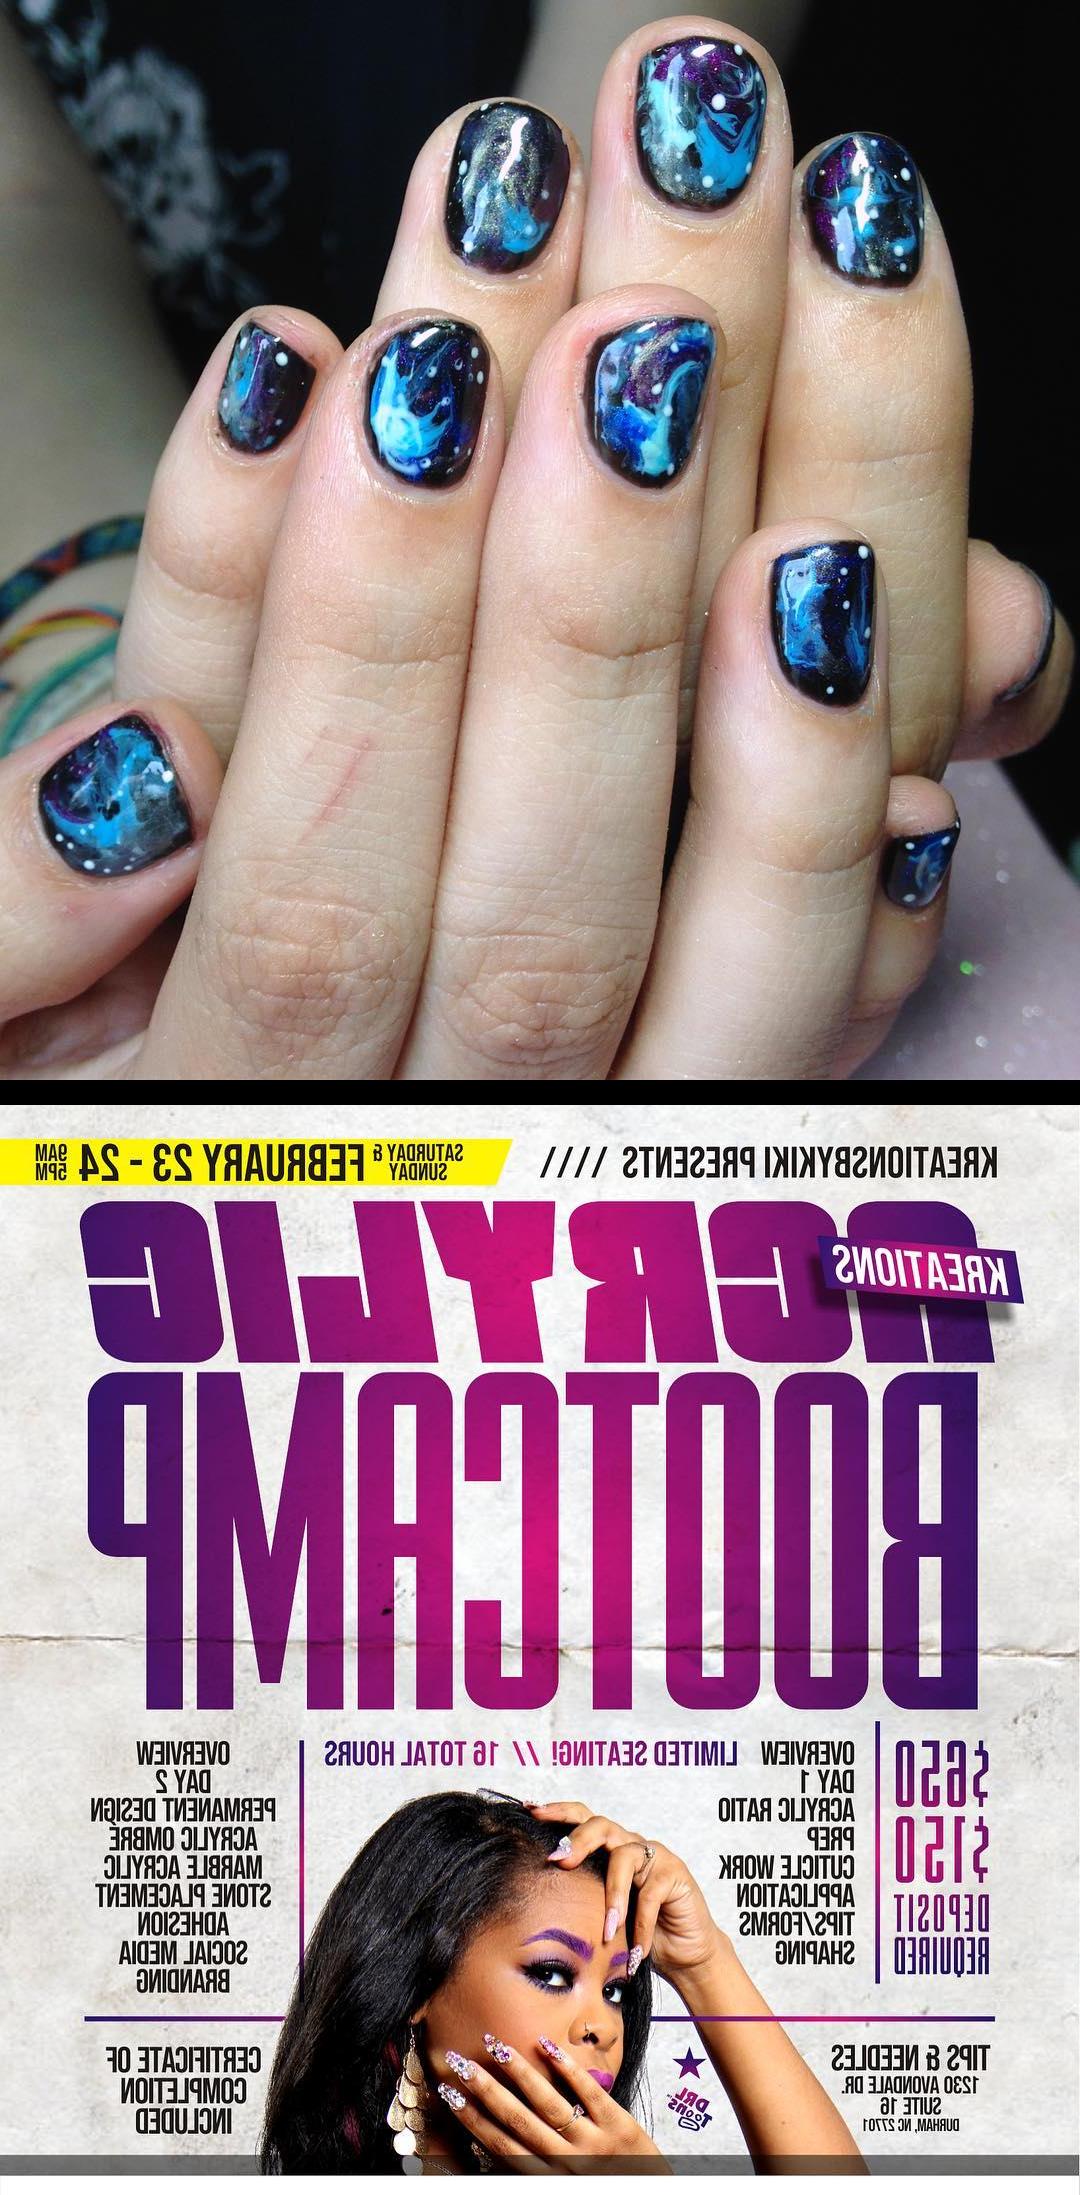 yellow acrylic nails,zoya,GALAXY shellak nails con manicura citas a partir del lunes 5 de junio The next Acrylic Boot Camp has been released! This class offers my knowledge of great techniques broken down so anyone can learn, veterans or beginners!  Great vibes, great food plus group and one on one sessions with me so I can make sure you are receiving everything Ishowcasing down to the smallest detail! Link is in my bio! Only 14 tickets left! $150 deposit required to hold your slot that goes toward your total. , nopolish , allacrylic , kreationsbykiki , nails , ncnails , raleighnails , durhamnails , glitter , glitternails , tumblr , nailsofinstagram , nailsoftheday , nailpro , fashion , nailart , nailtutorial , bgdn , blackgirlsdonails , blacknailtechs , naillife , nailsmagazine , tumblrfeature , dulcenailsprinkles 